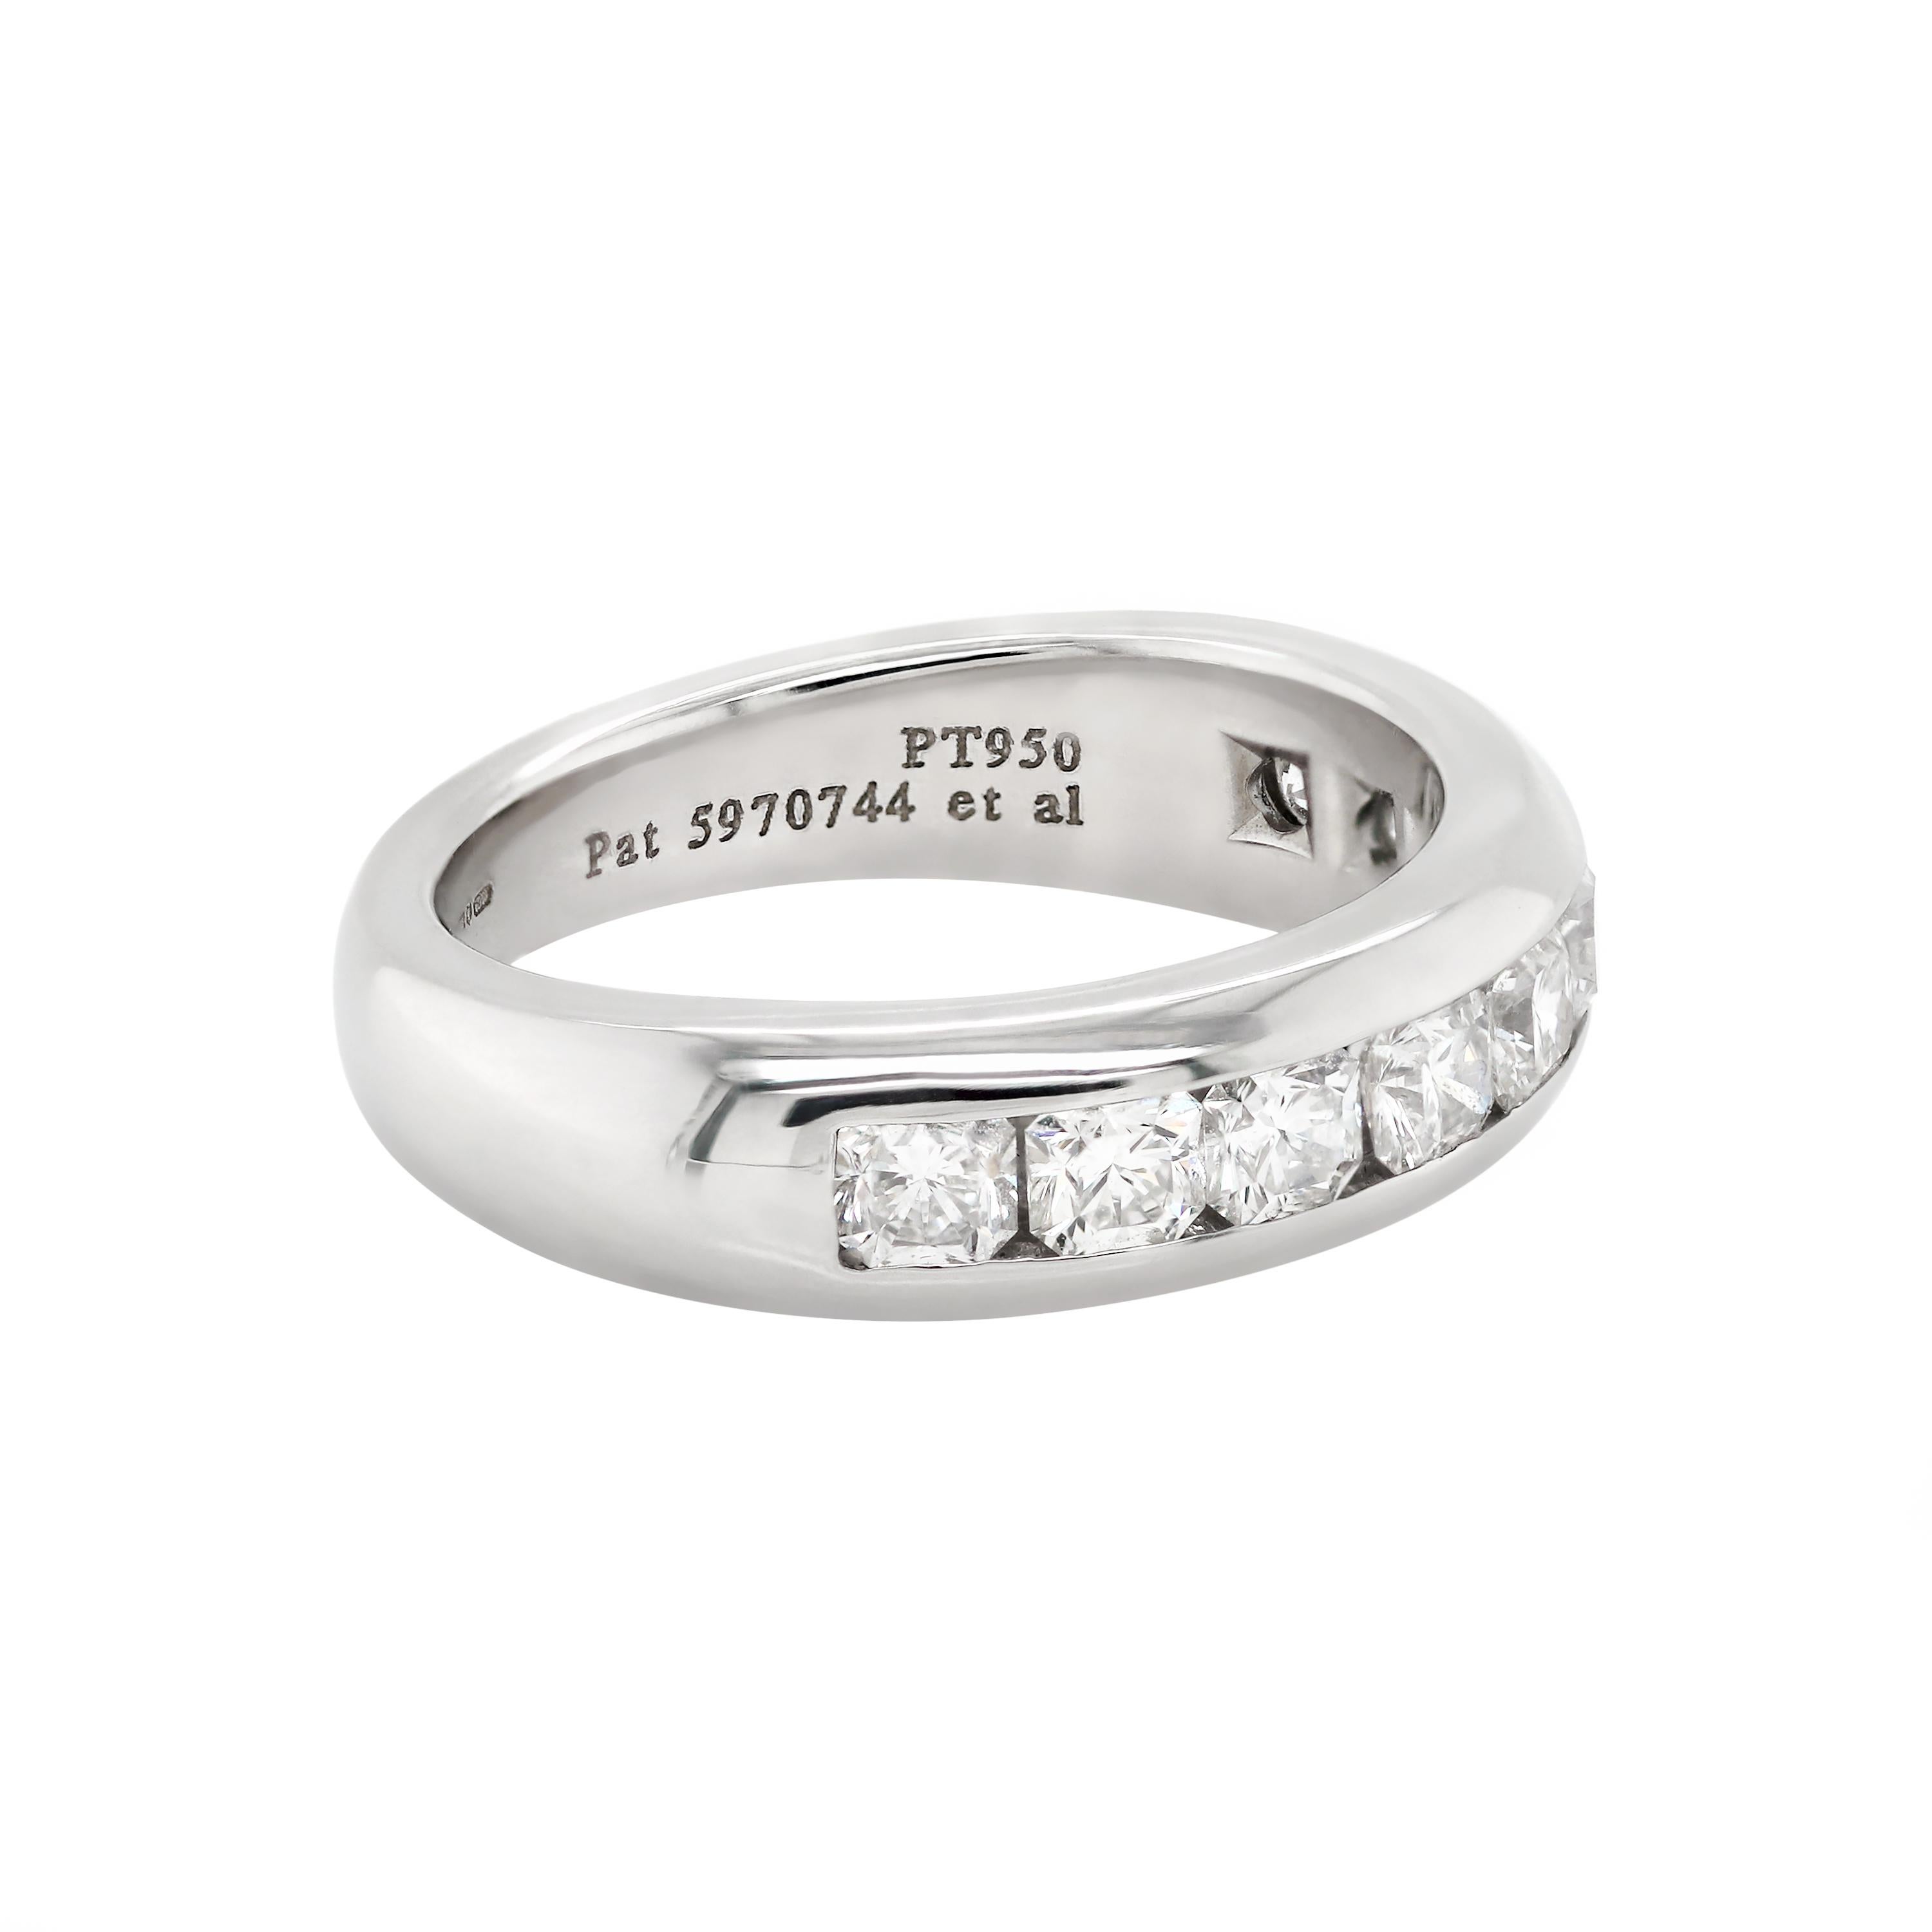 This beautiful half eternity band made by luxury designer, Tiffany & Co. is from their signature Lucida collection. Channel set with 9 Tiffany Lucida cut diamonds, weighing an approximate total weight of 1.00ct are all rub-over set in a 4.8mm